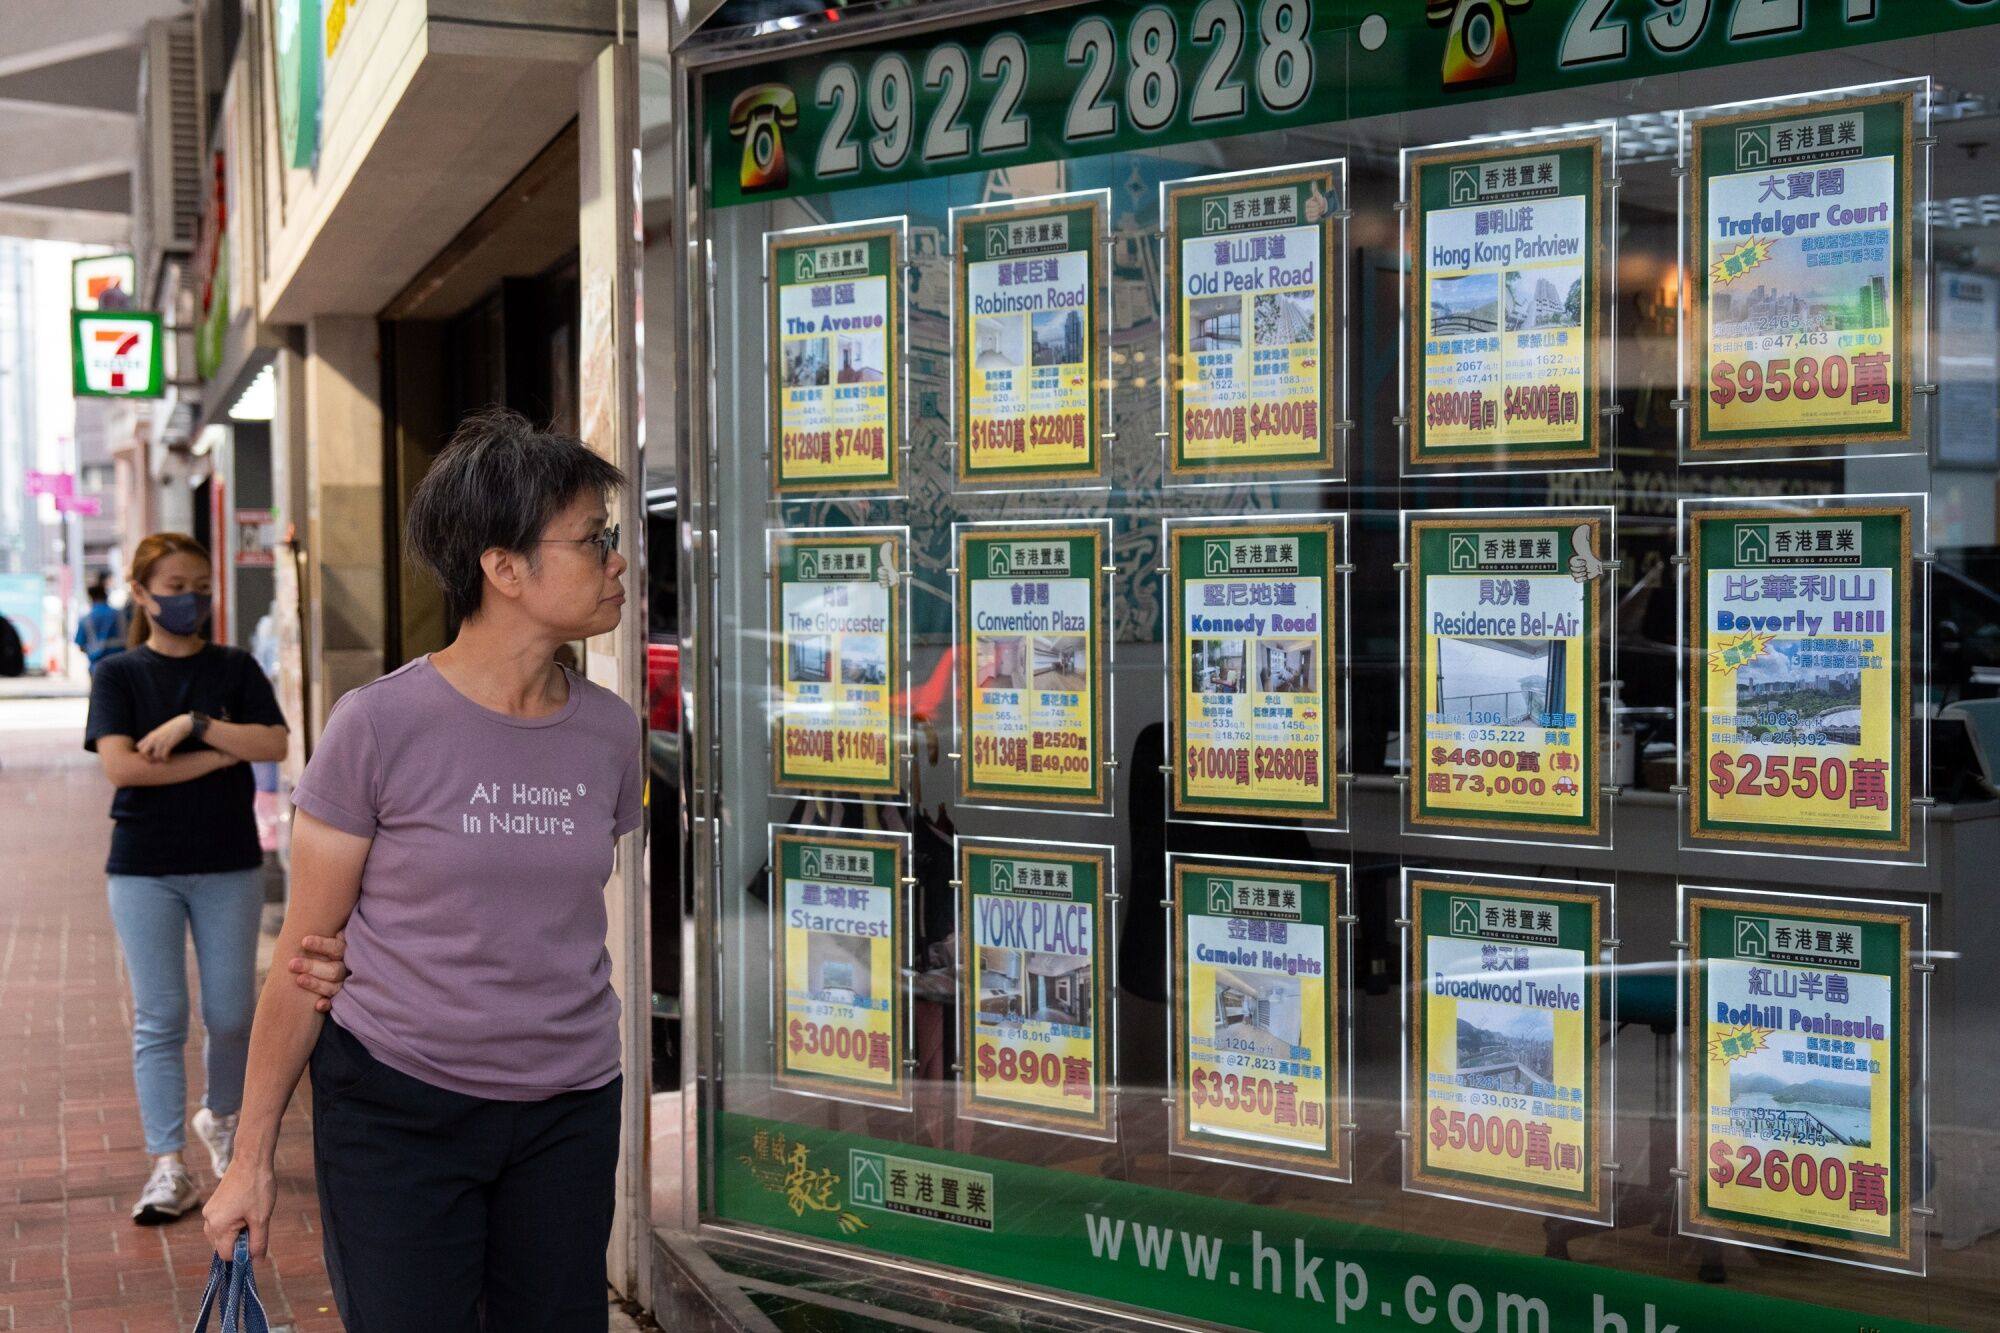 Residential property advertisements at a real estate agency in Hong Kong. Photo: Bloomberg